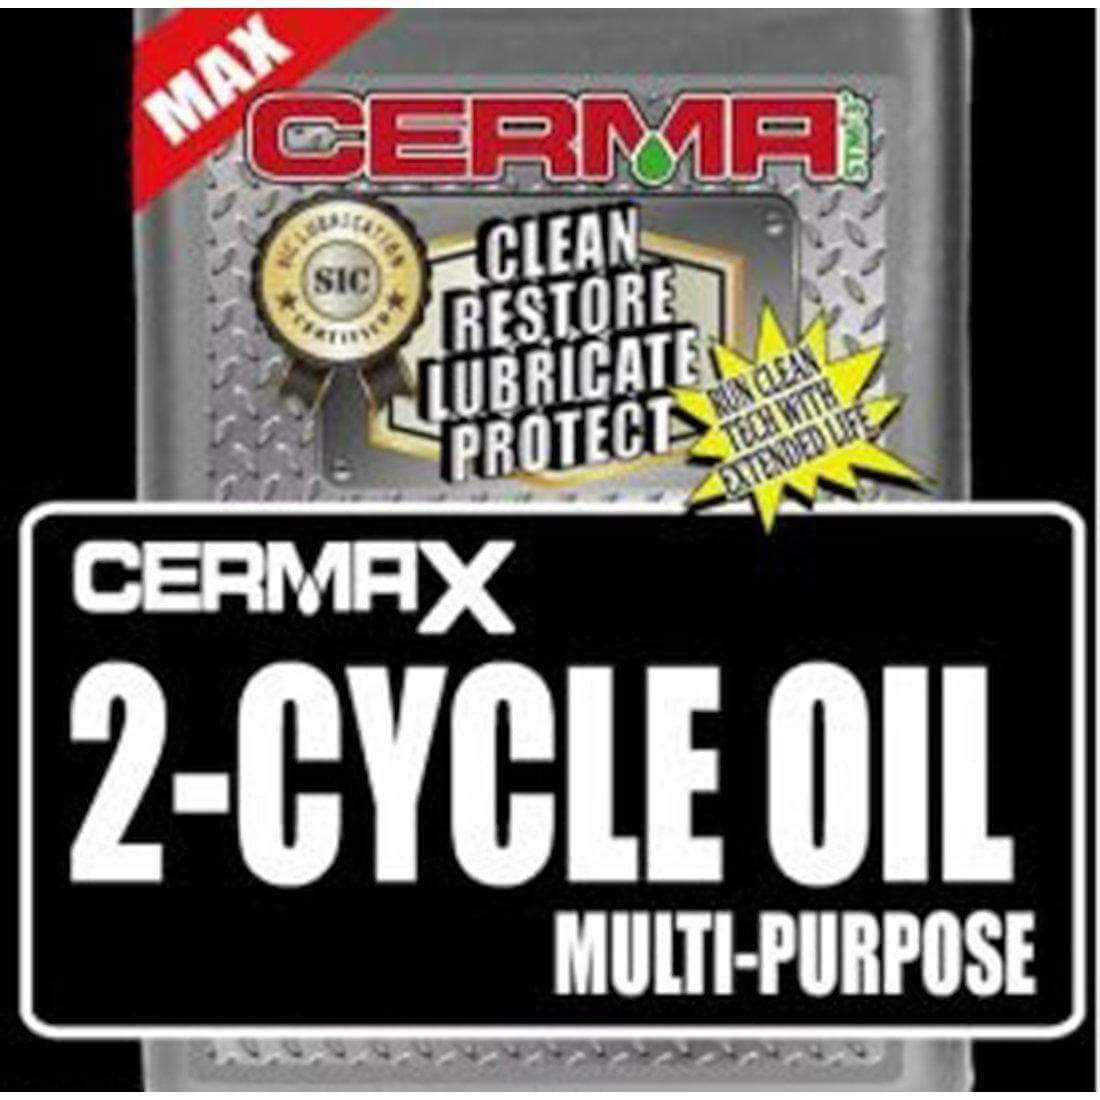 Cermax Ceramic 2-Cycle Multi-Ratio Oil at $21.56 only from cermatreatment.com